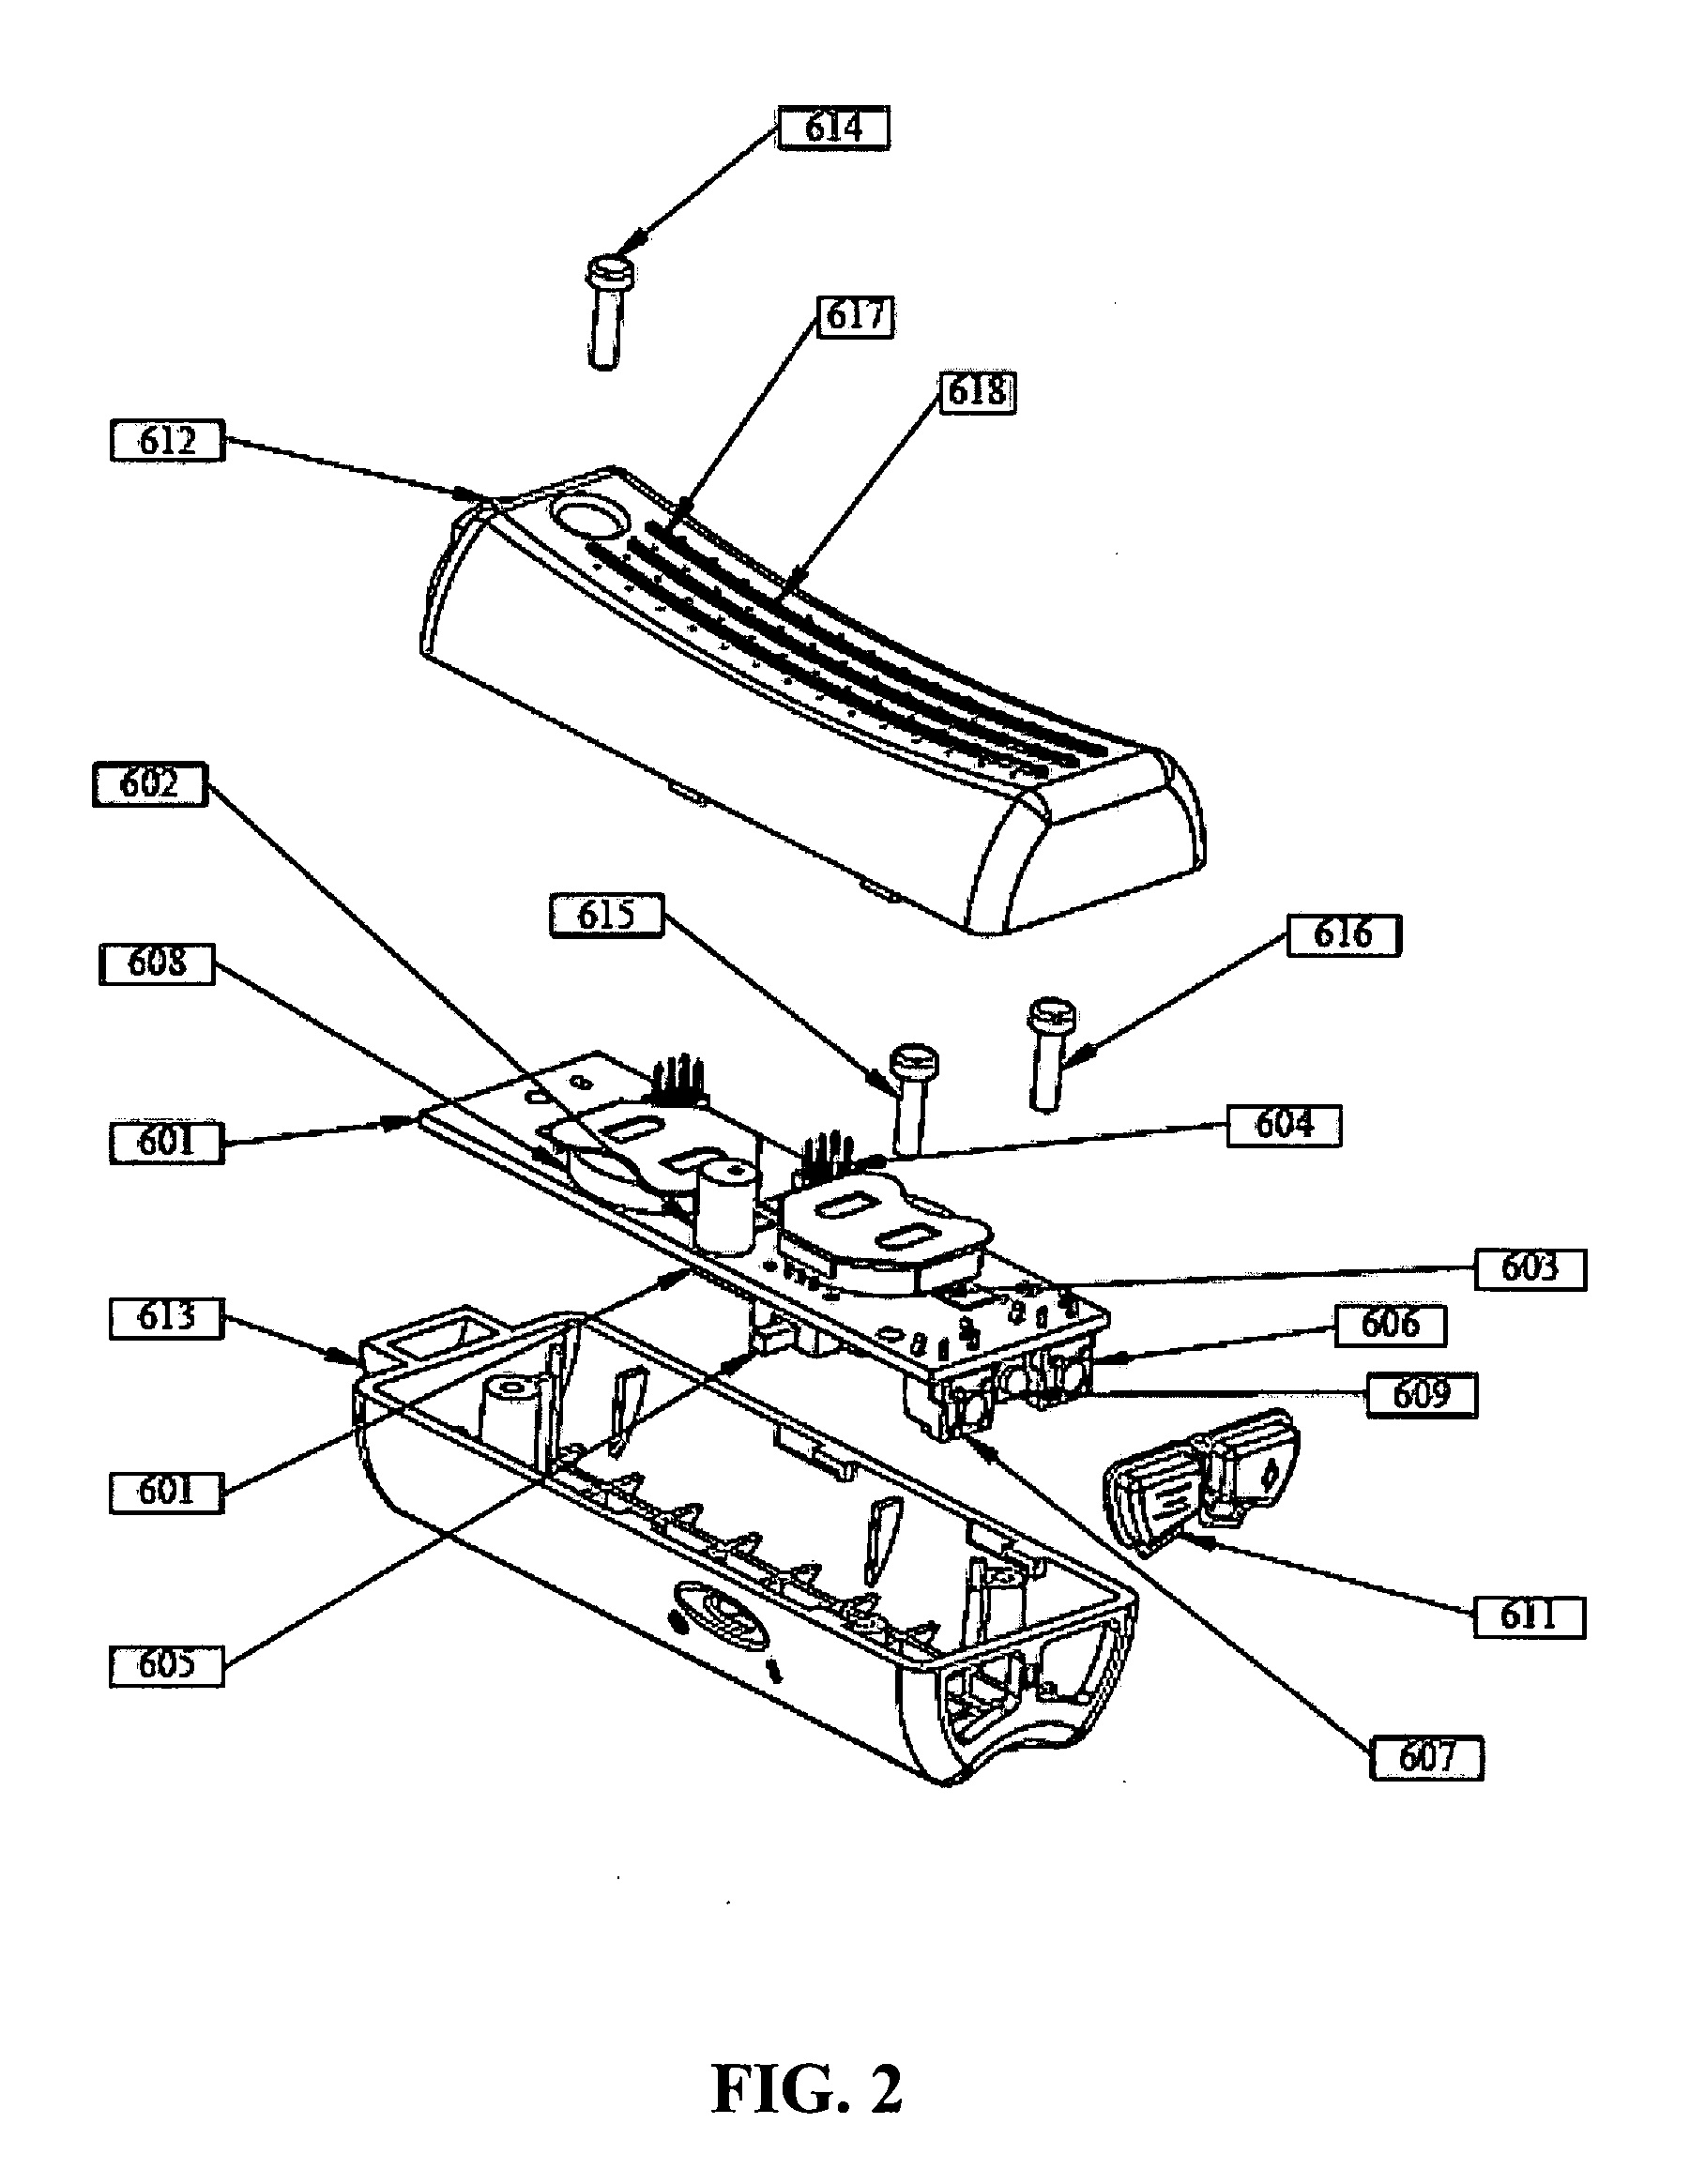 Apparatus and method for digitization of human motion for virtual gaming